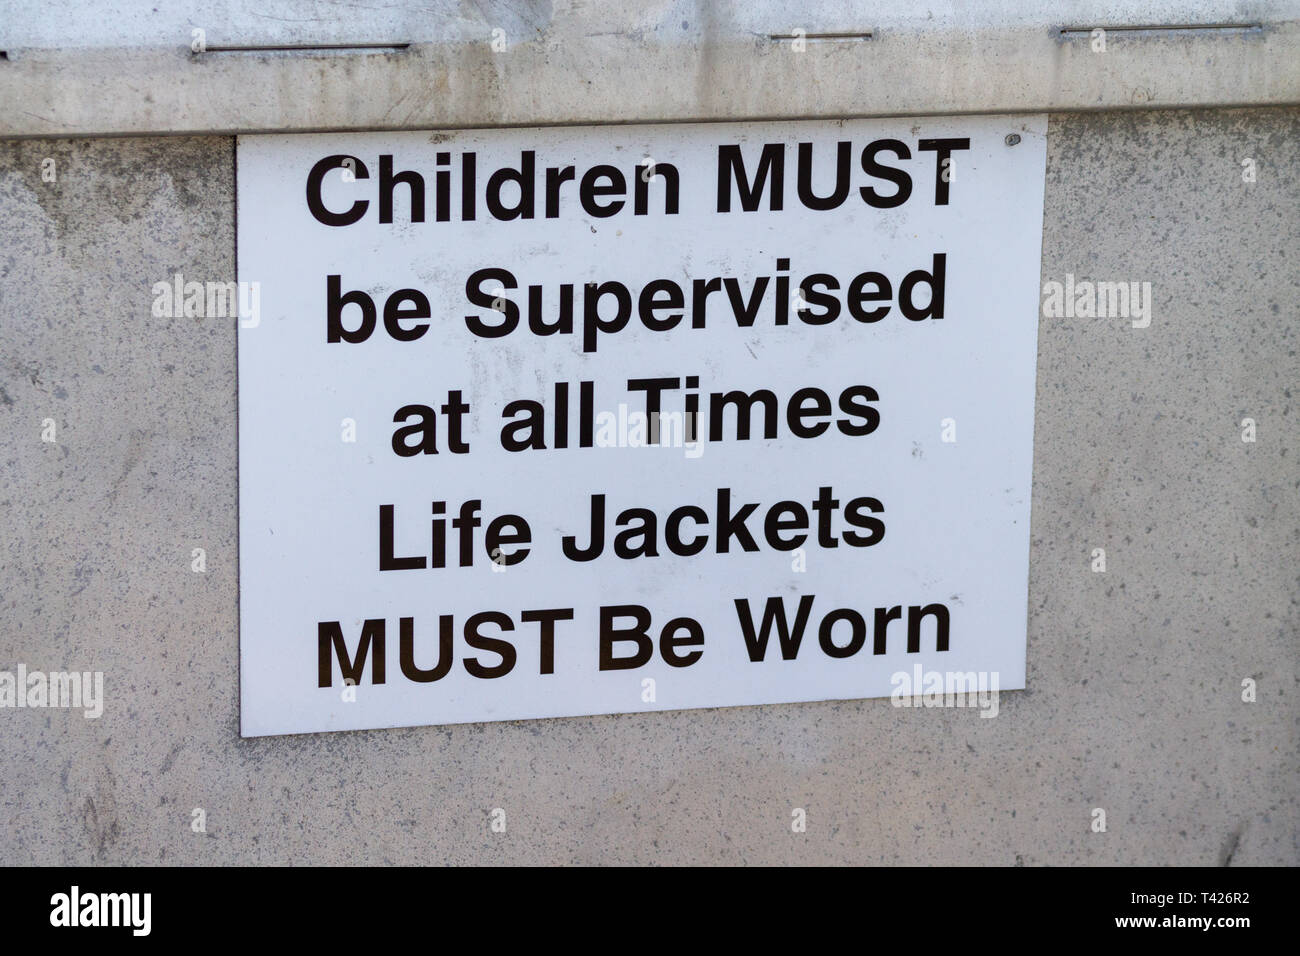 warning sign for children to be supervised at all times. Stock Photo